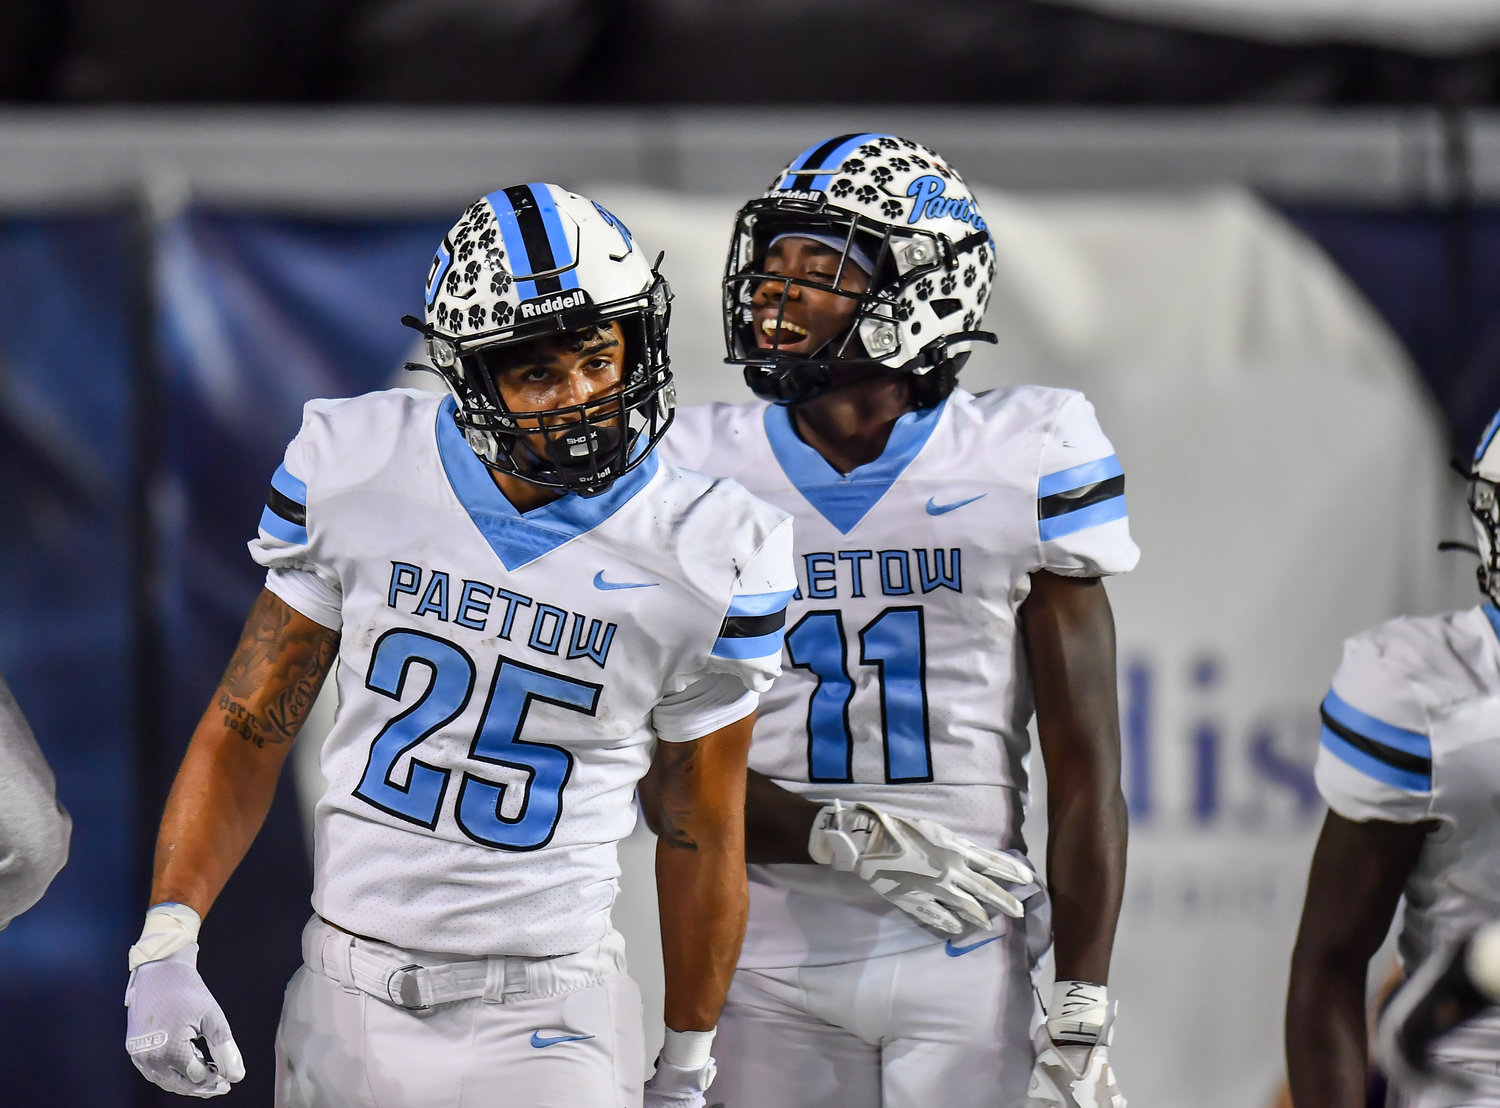 Houston, Tx. Dec 3, 2021: Paetow's Jacob Brown #25 celebrates a TD with team mate Kole Wilson #11 during the quarterfinal playoff game between Paetow and F,B. Hightower at Rice Stadium in Houston. (Photo by Mark Gooman / Katy Times)